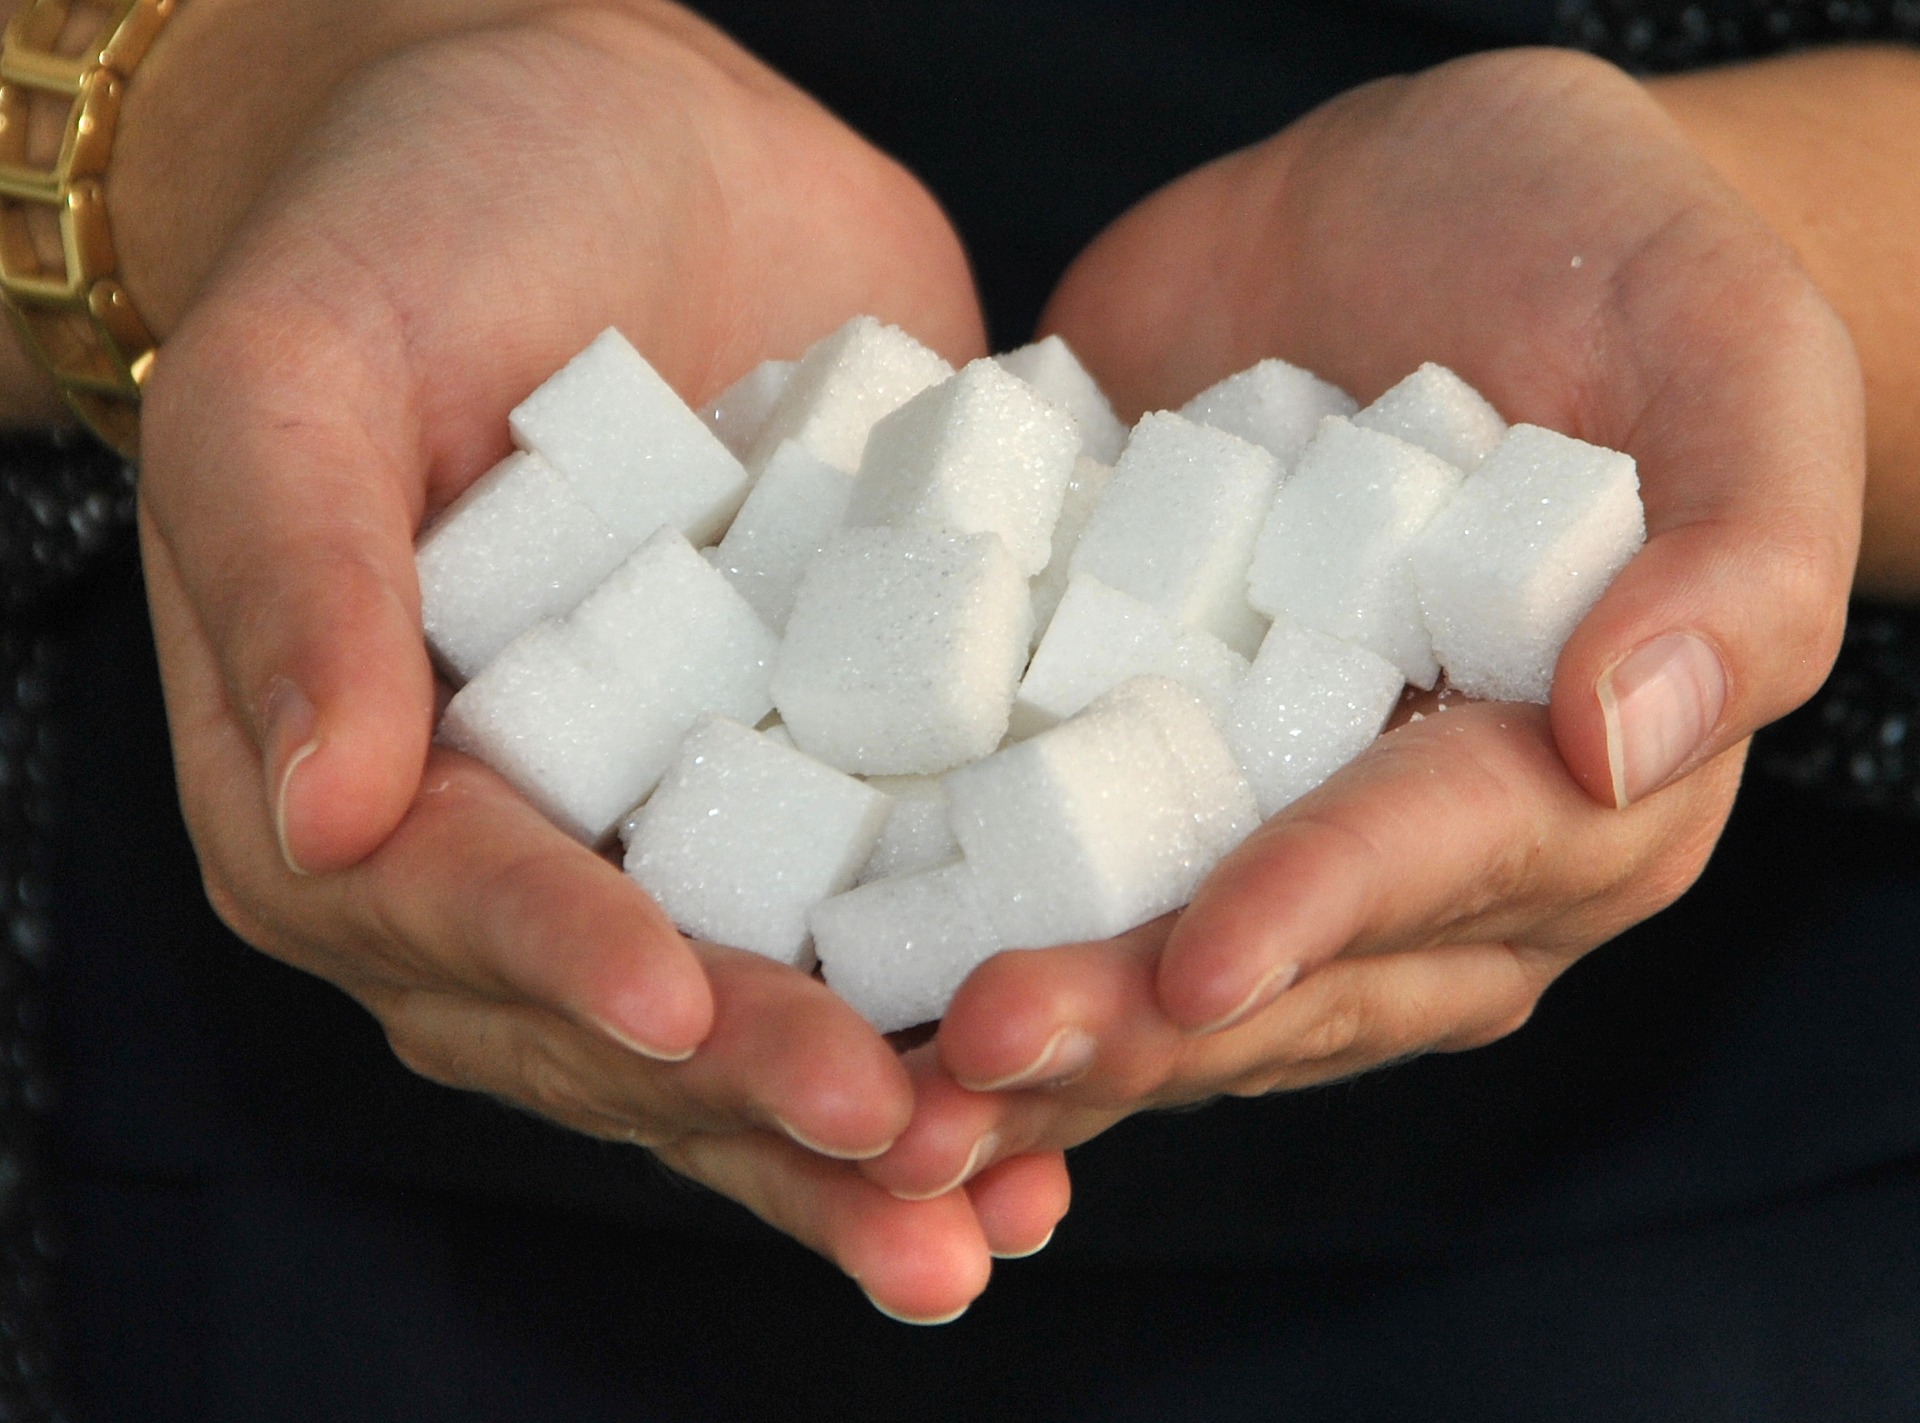 Cupped hands holding sugar cubes